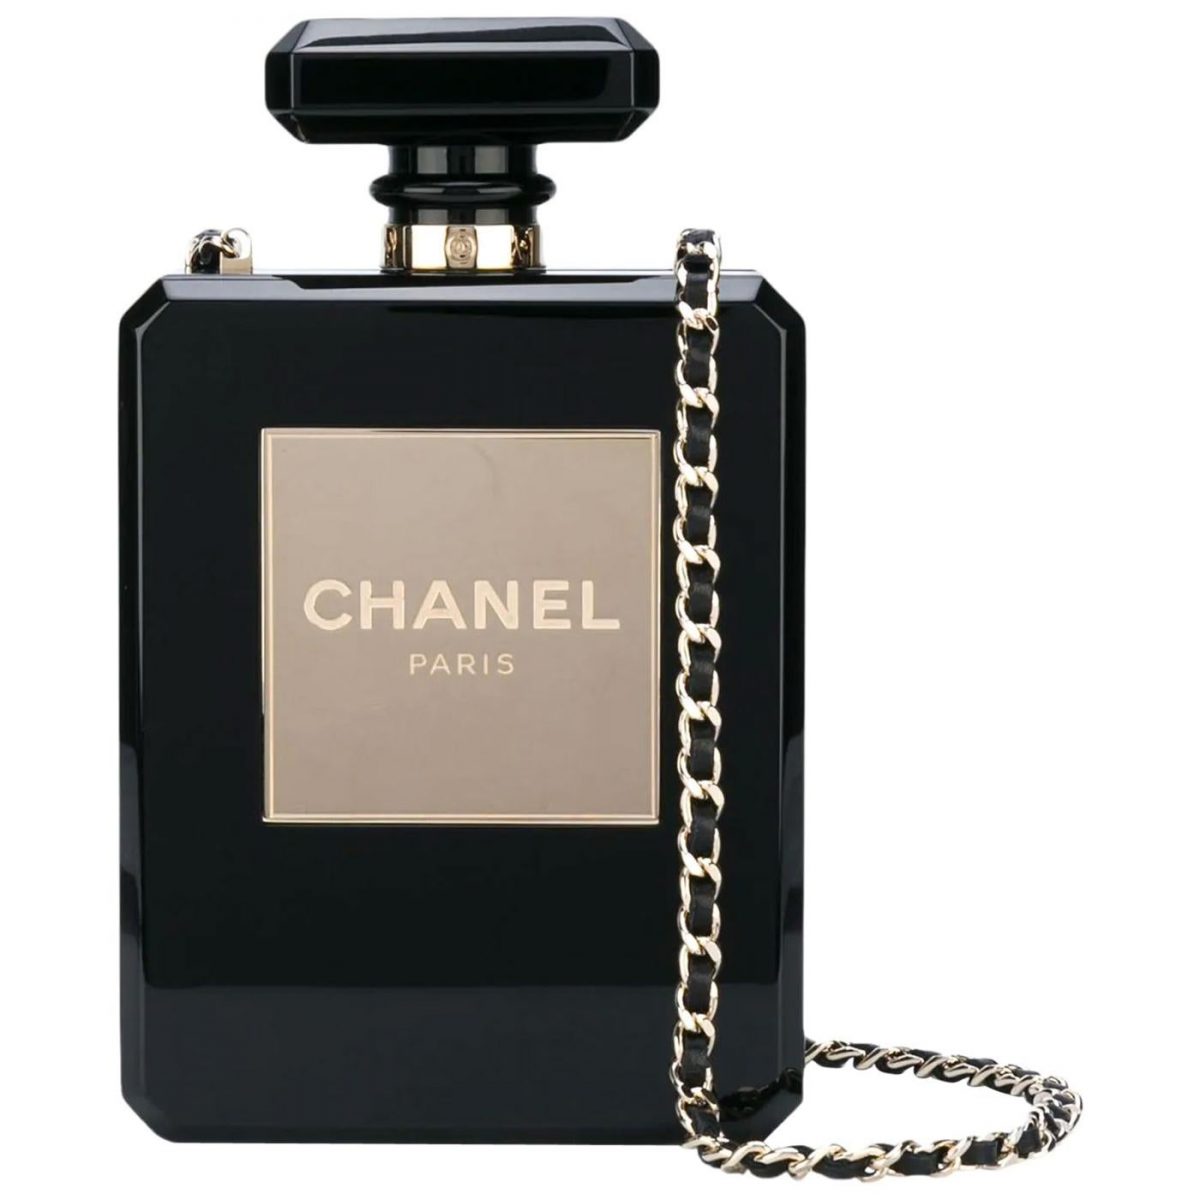 Impossible-to-Find Chanel Handbags Are House of Carver’s Stock-in-Trade ...